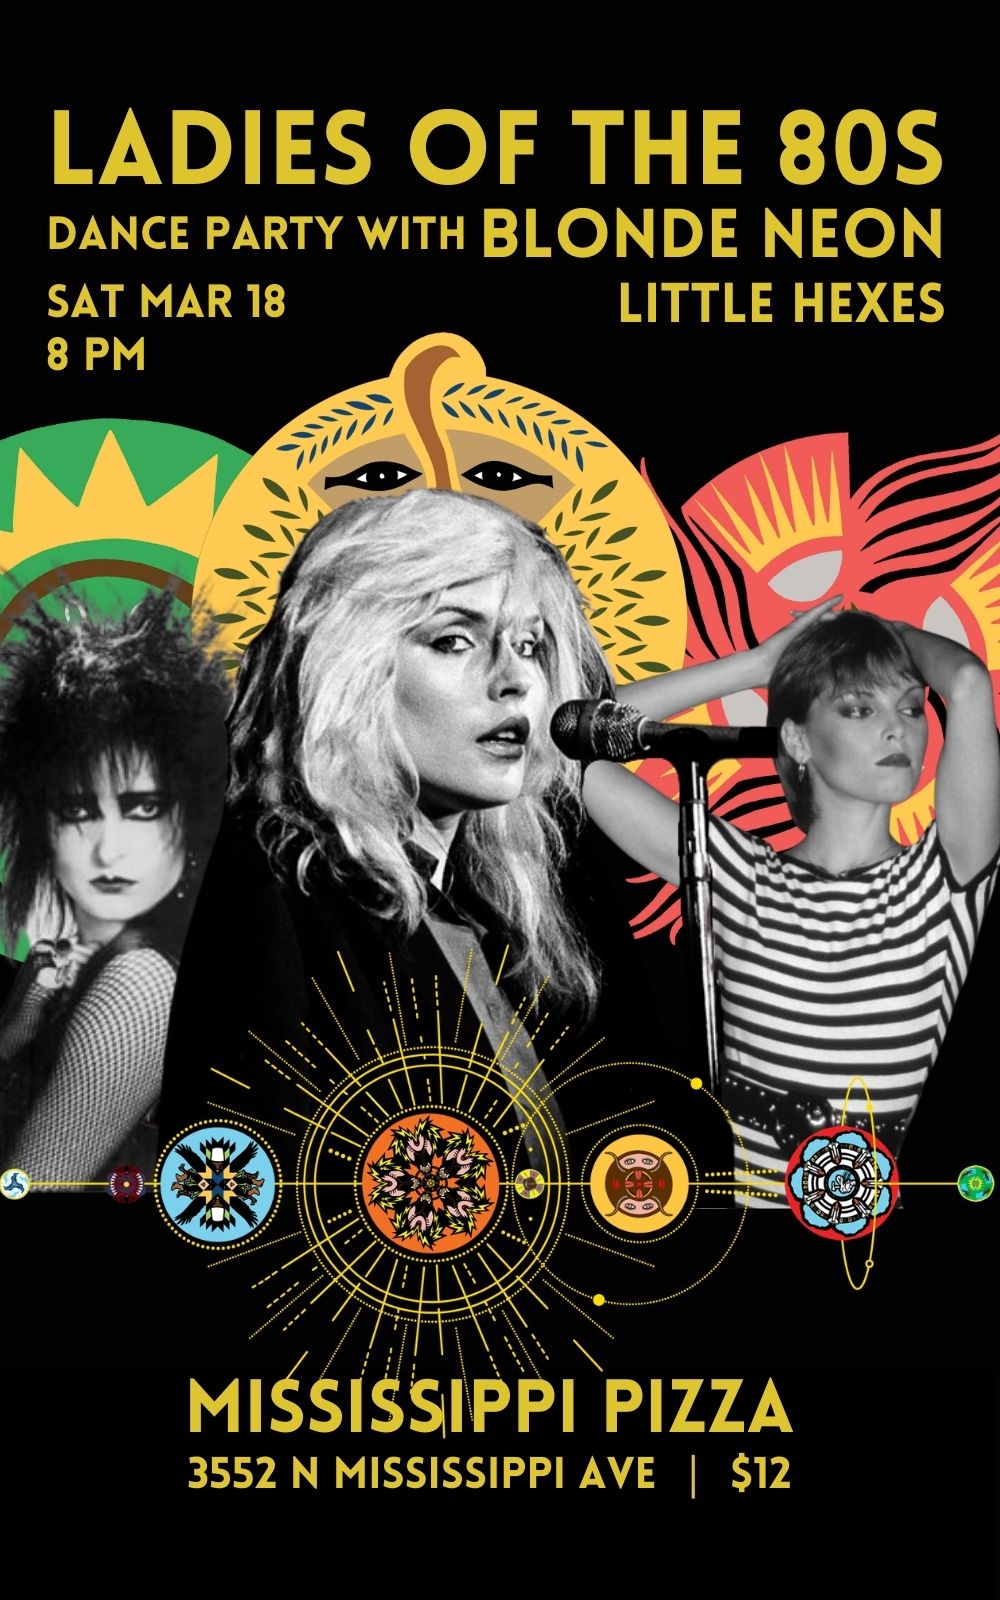 Little hexes and Blonde Neon present ladies of the 80s dance party. Images of 80s icons and hex signs.